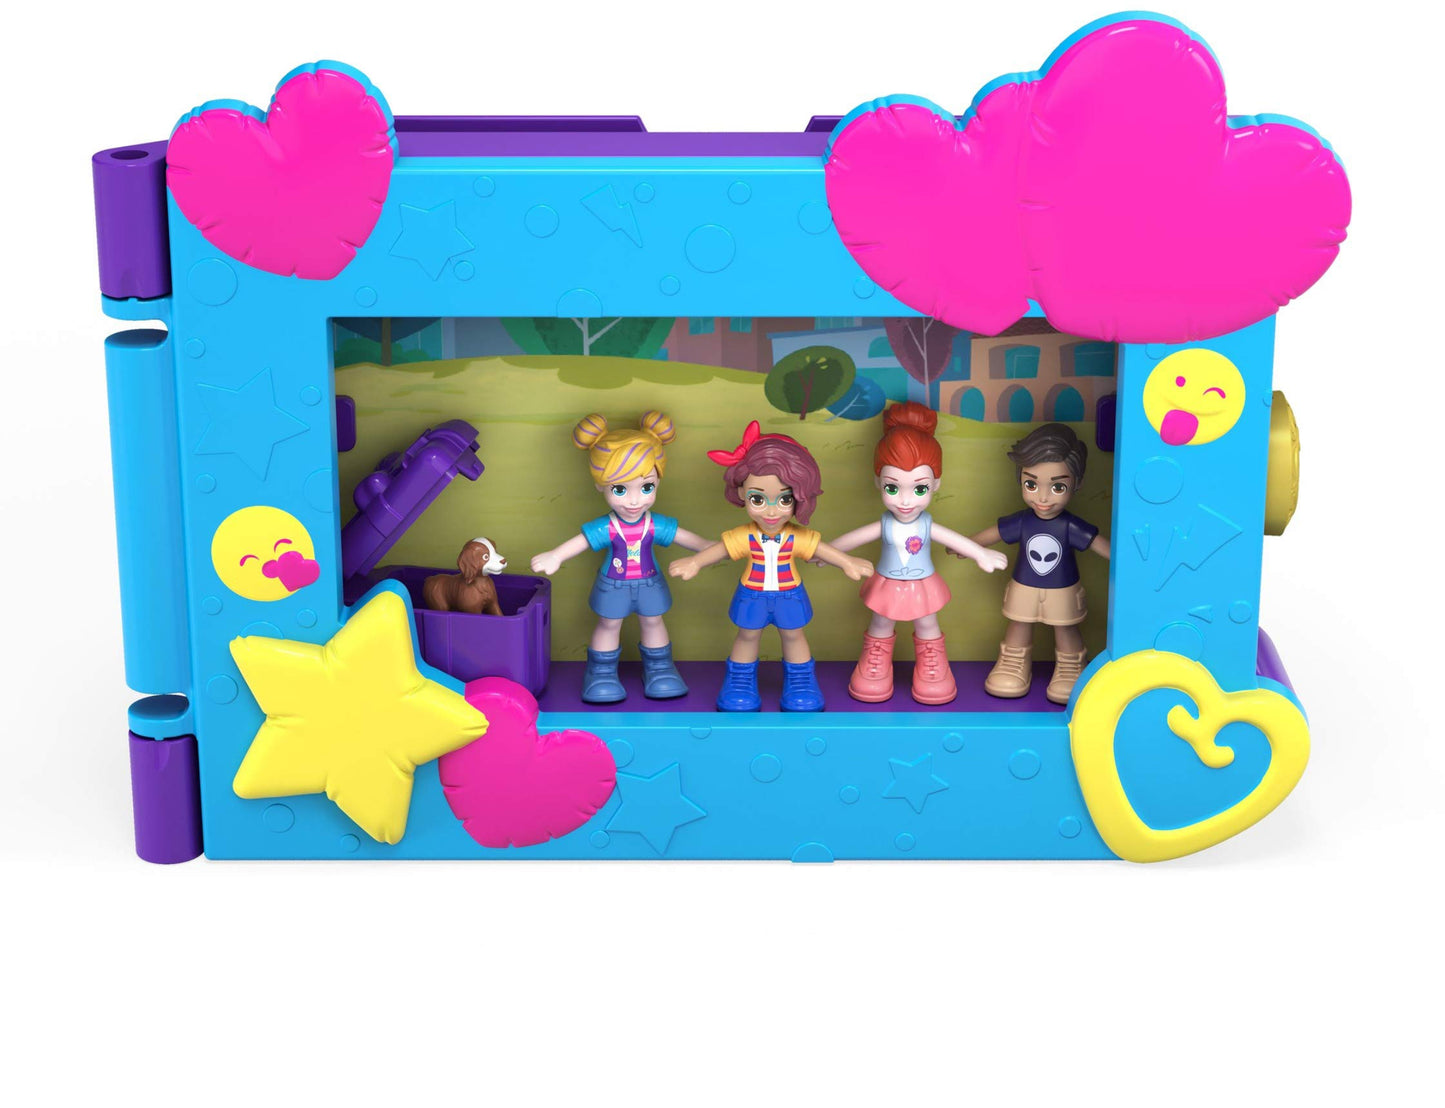 POLLY POCKET Polly et ses amis prennent la pose